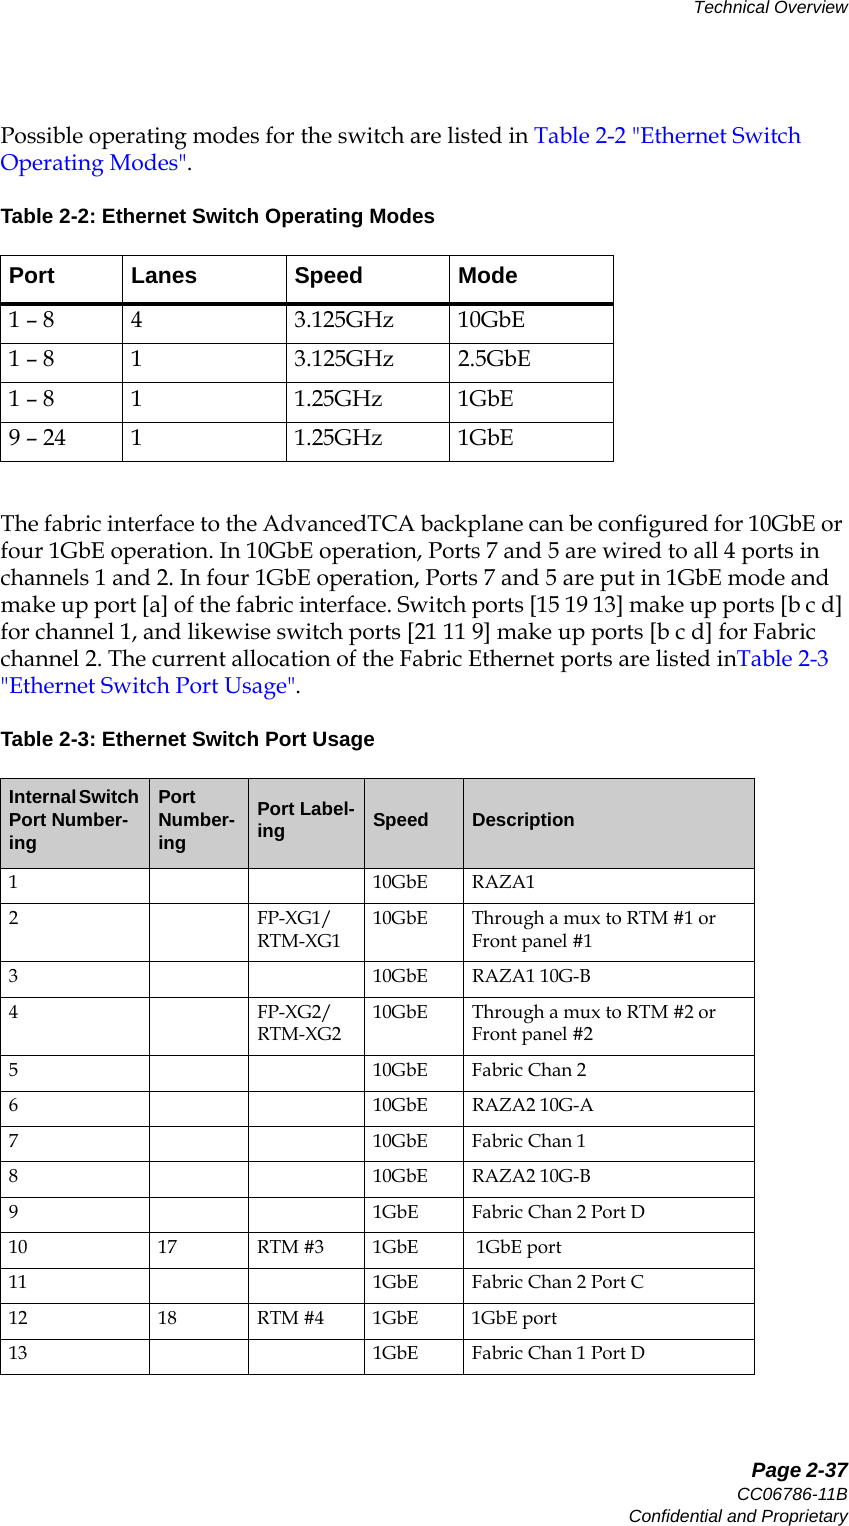   Page 2-37CC06786-11BConfidential and ProprietaryTechnical Overview14ABABPreliminaryPossible operating modes for the switch are listed in Table 2-2 &quot;Ethernet Switch Operating Modes&quot;. The fabric interface to the AdvancedTCA backplane can be configured for 10GbE or four 1GbE operation. In 10GbE operation, Ports 7 and 5 are wired to all 4 ports in channels 1 and 2. In four 1GbE operation, Ports 7 and 5 are put in 1GbE mode and make up port [a] of the fabric interface. Switch ports [15 19 13] make up ports [b c d] for channel 1, and likewise switch ports [21 11 9] make up ports [b c d] for Fabric channel 2. The current allocation of the Fabric Ethernet ports are listed inTable 2-3 &quot;Ethernet Switch Port Usage&quot;.Table 2-2: Ethernet Switch Operating ModesPort Lanes Speed Mode1 – 8  4 3.125GHz 10GbE1 – 8 1 3.125GHz 2.5GbE1 – 8  1 1.25GHz 1GbE9 – 24 1 1.25GHz 1GbETable 2-3: Ethernet Switch Port UsageInternal Switch Port Number-ingPort Number-ingPort Label-ing Speed Description1 10GbE RAZA12FP-XG1/RTM-XG110GbE Through a mux to RTM #1 or Front panel #13 10GbE RAZA1 10G-B 4FP-XG2/RTM-XG210GbE Through a mux to RTM #2 or Front panel #25 10GbE Fabric Chan 26 10GbE RAZA2 10G-A7 10GbE Fabric Chan 18 10GbE RAZA2 10G-B 9 1GbE Fabric Chan 2 Port D10 17 RTM #3 1GbE  1GbE port11 1GbE Fabric Chan 2 Port C12 18 RTM #4  1GbE 1GbE port13 1GbE Fabric Chan 1 Port D